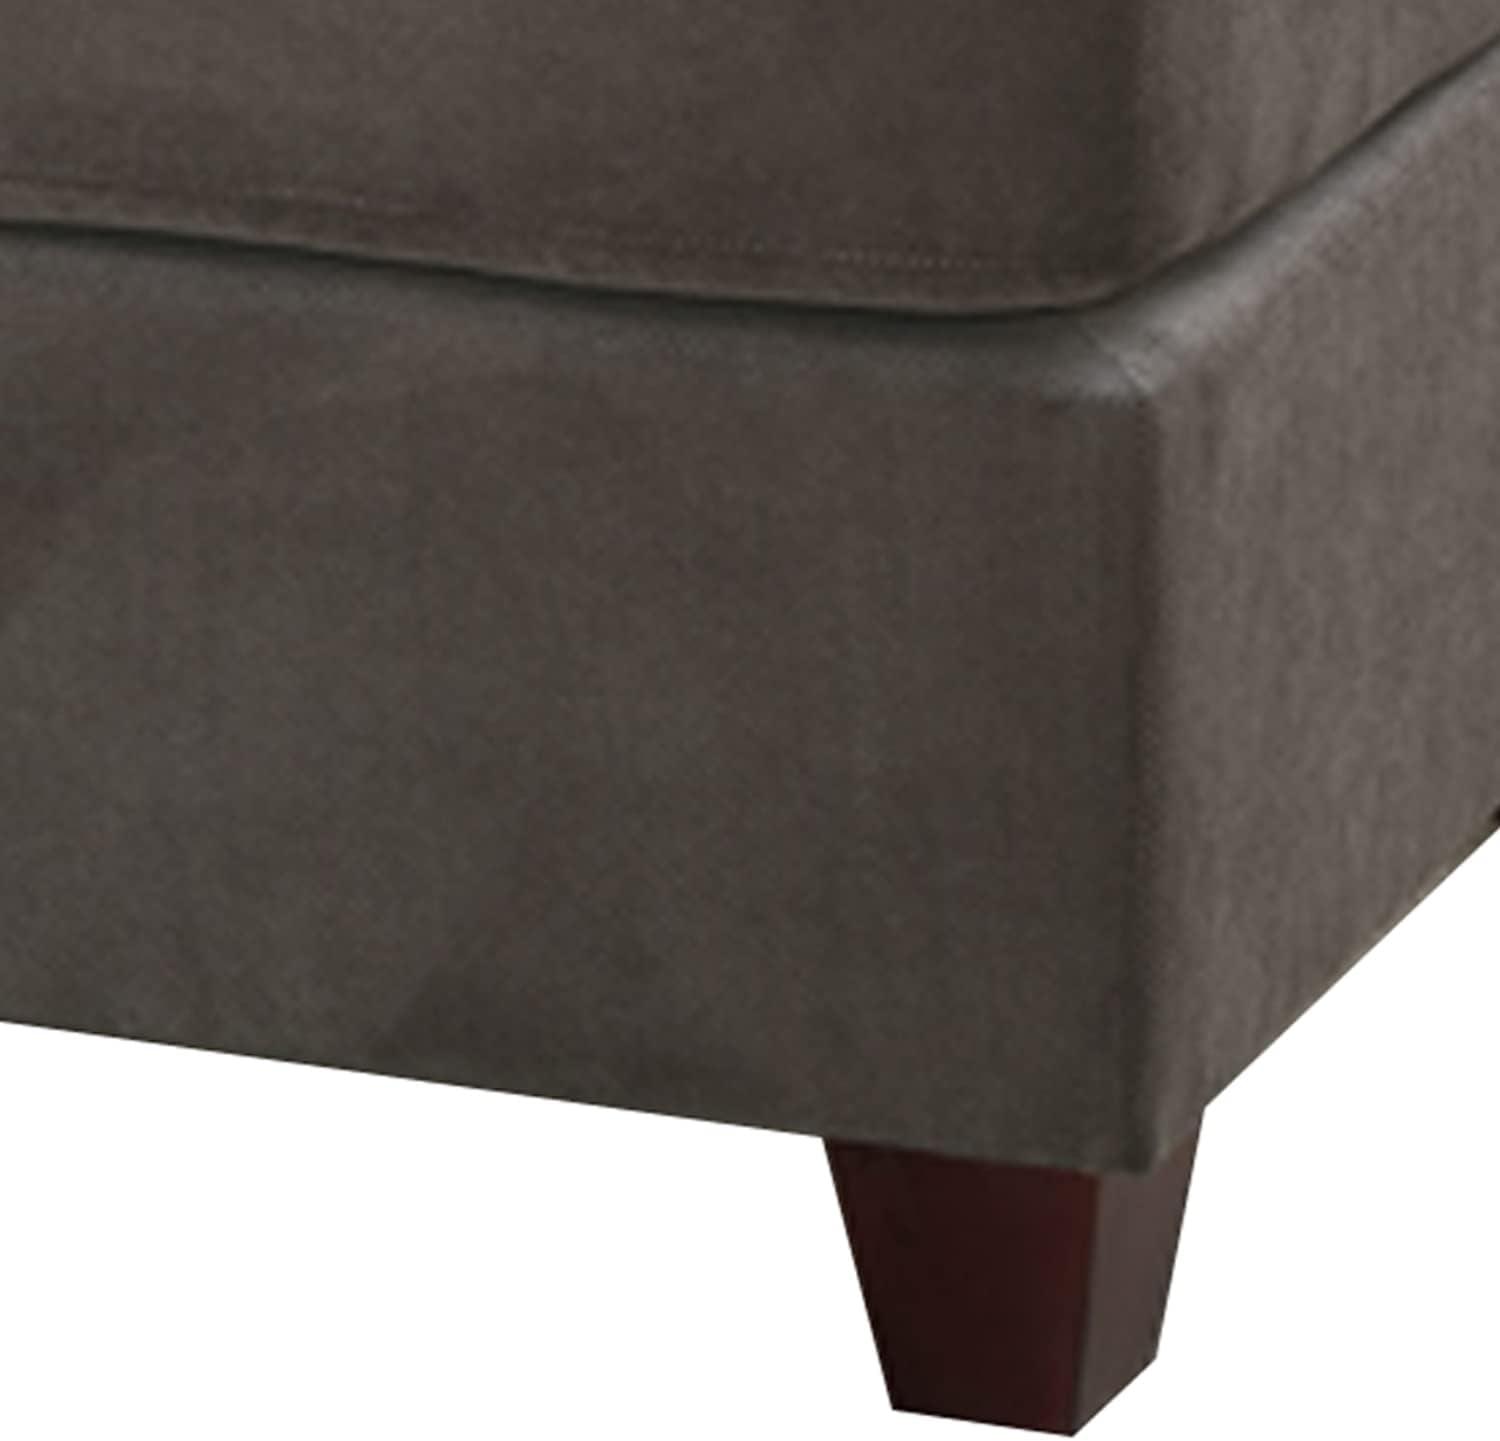 Charcoal Gray Tufted Waffle Suede Ottoman, 26" x 20"